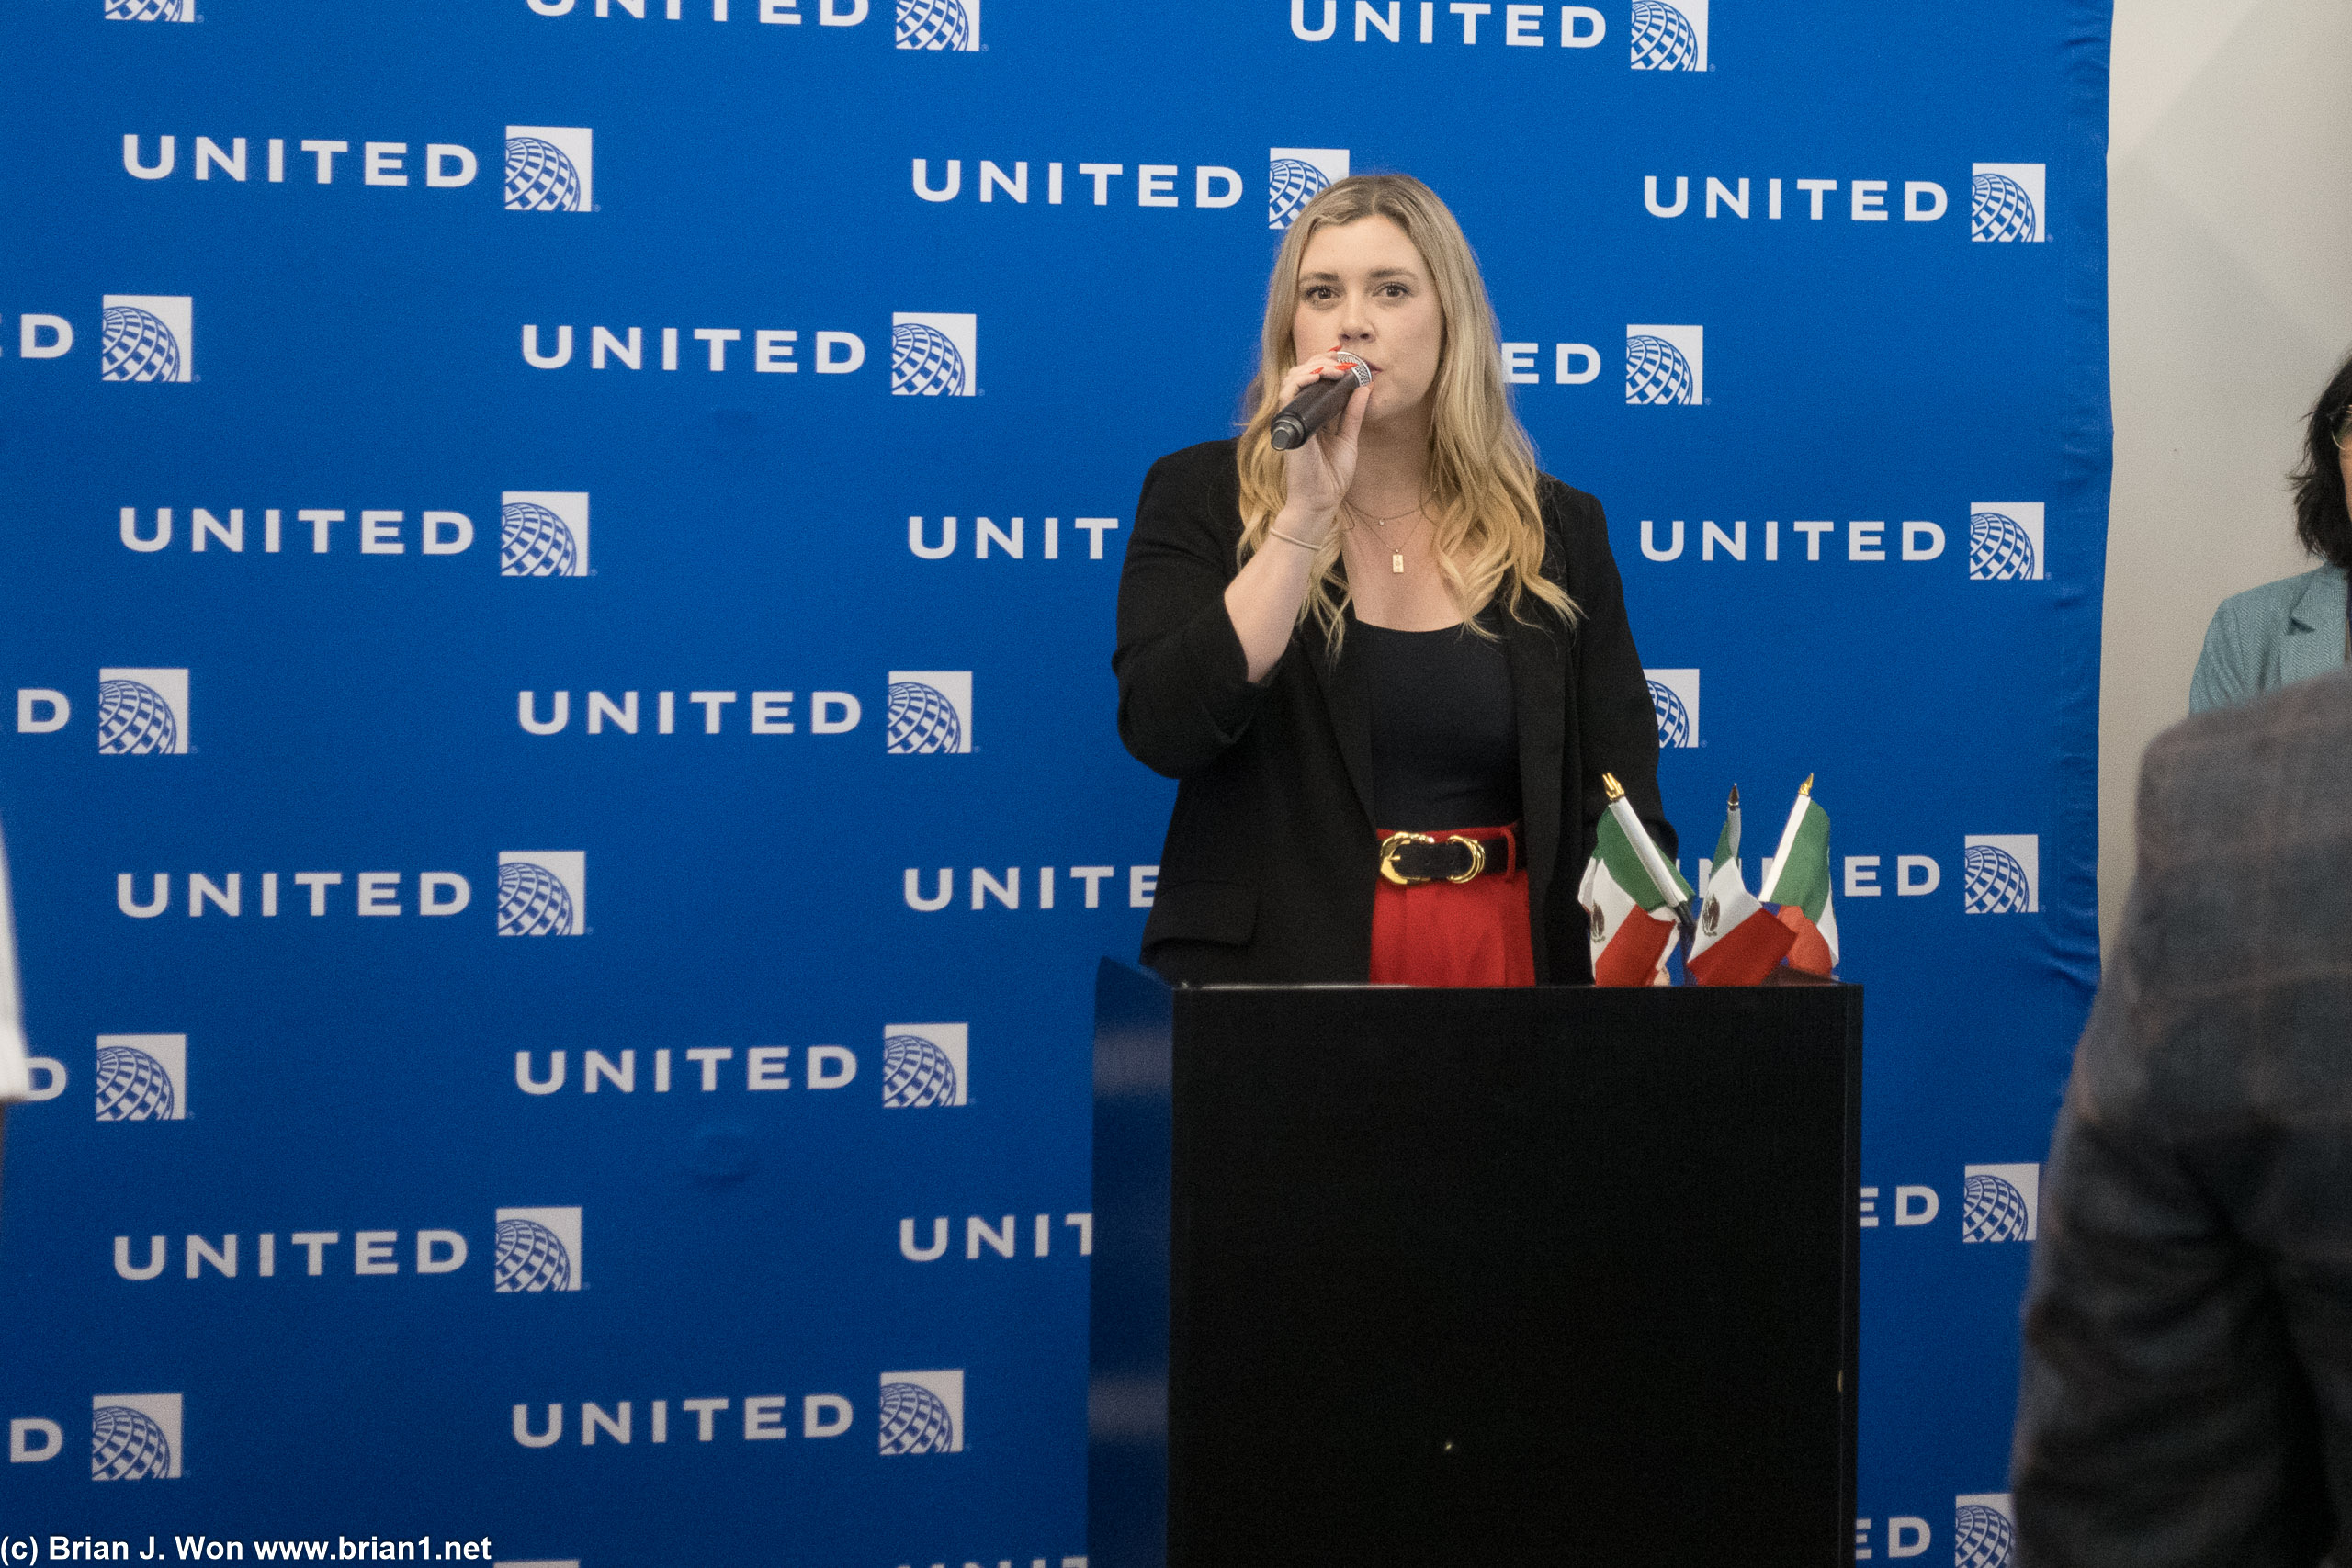 Maggie Ronan, Director of Global Market Strategy, United Airlines.